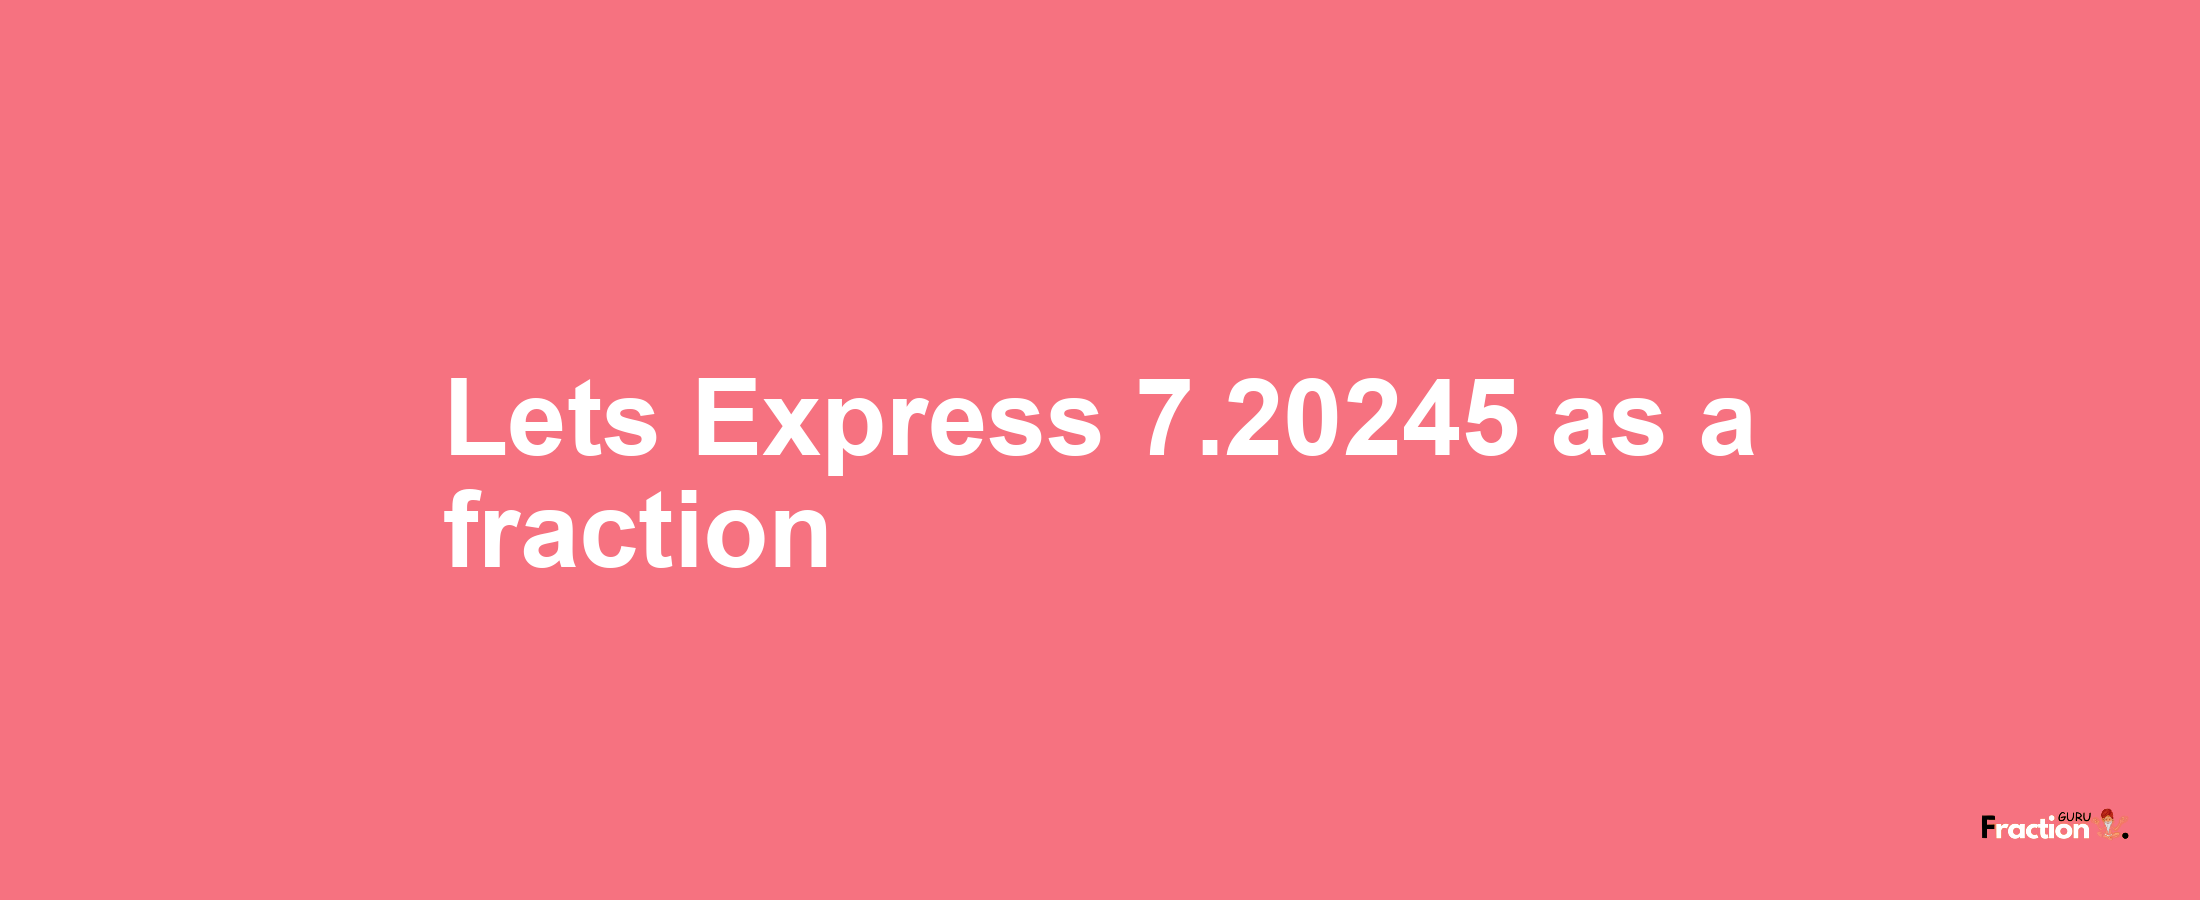 Lets Express 7.20245 as afraction